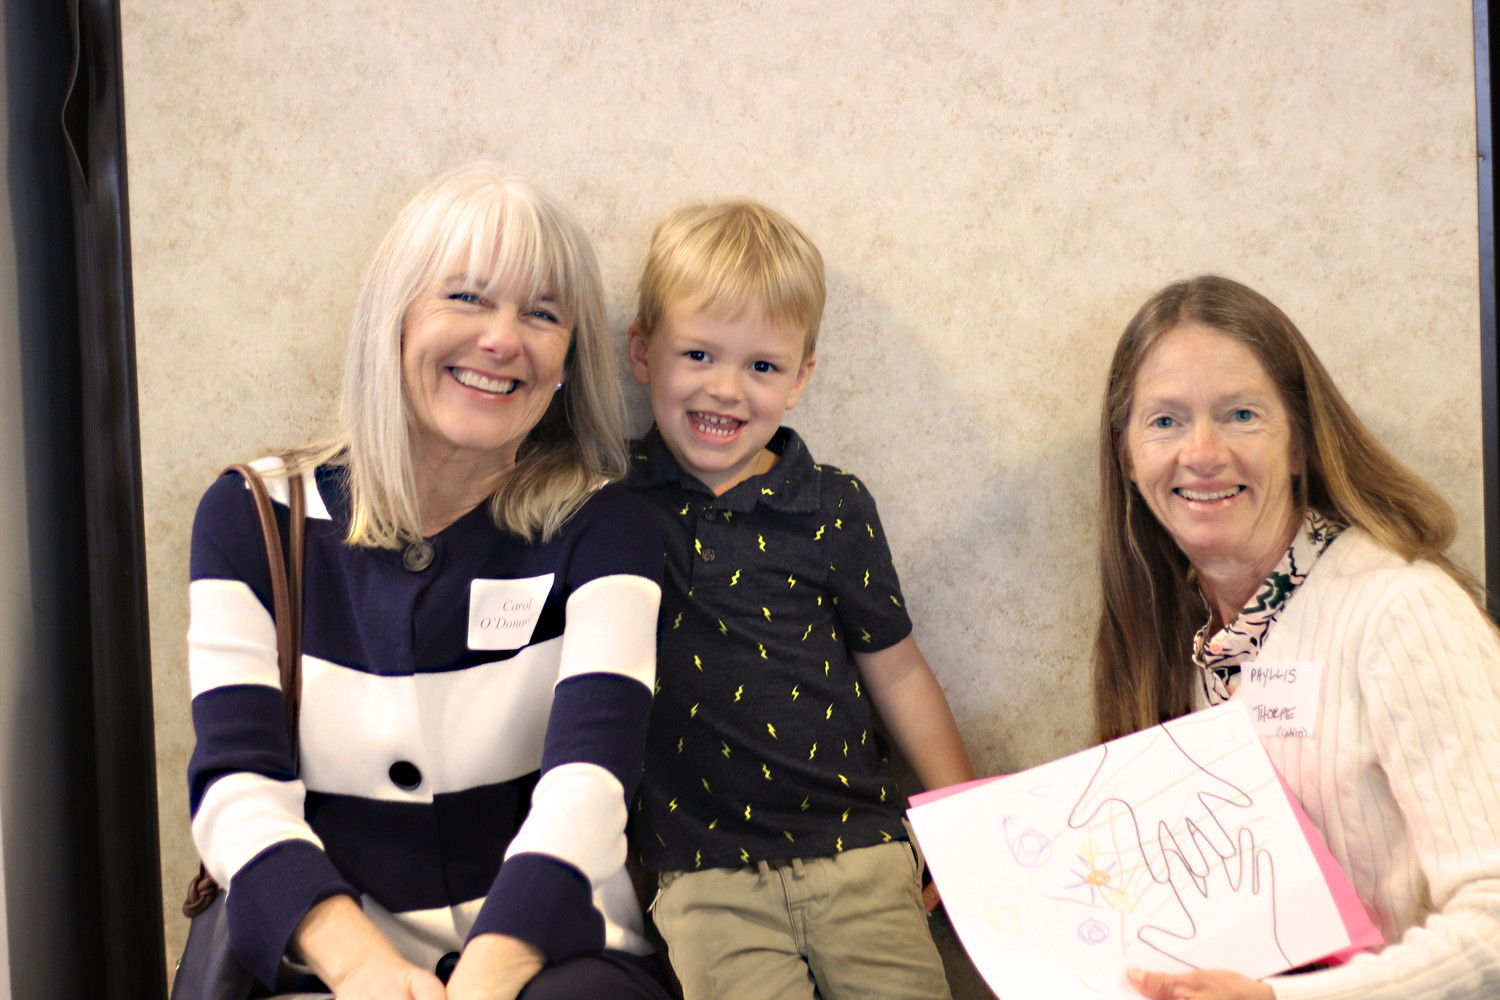 Christ Episcopal Church Preschool student Calvin Zalupski gathers with his grandparents on Wednesday, April 11, during the school’s Grandparents Day.